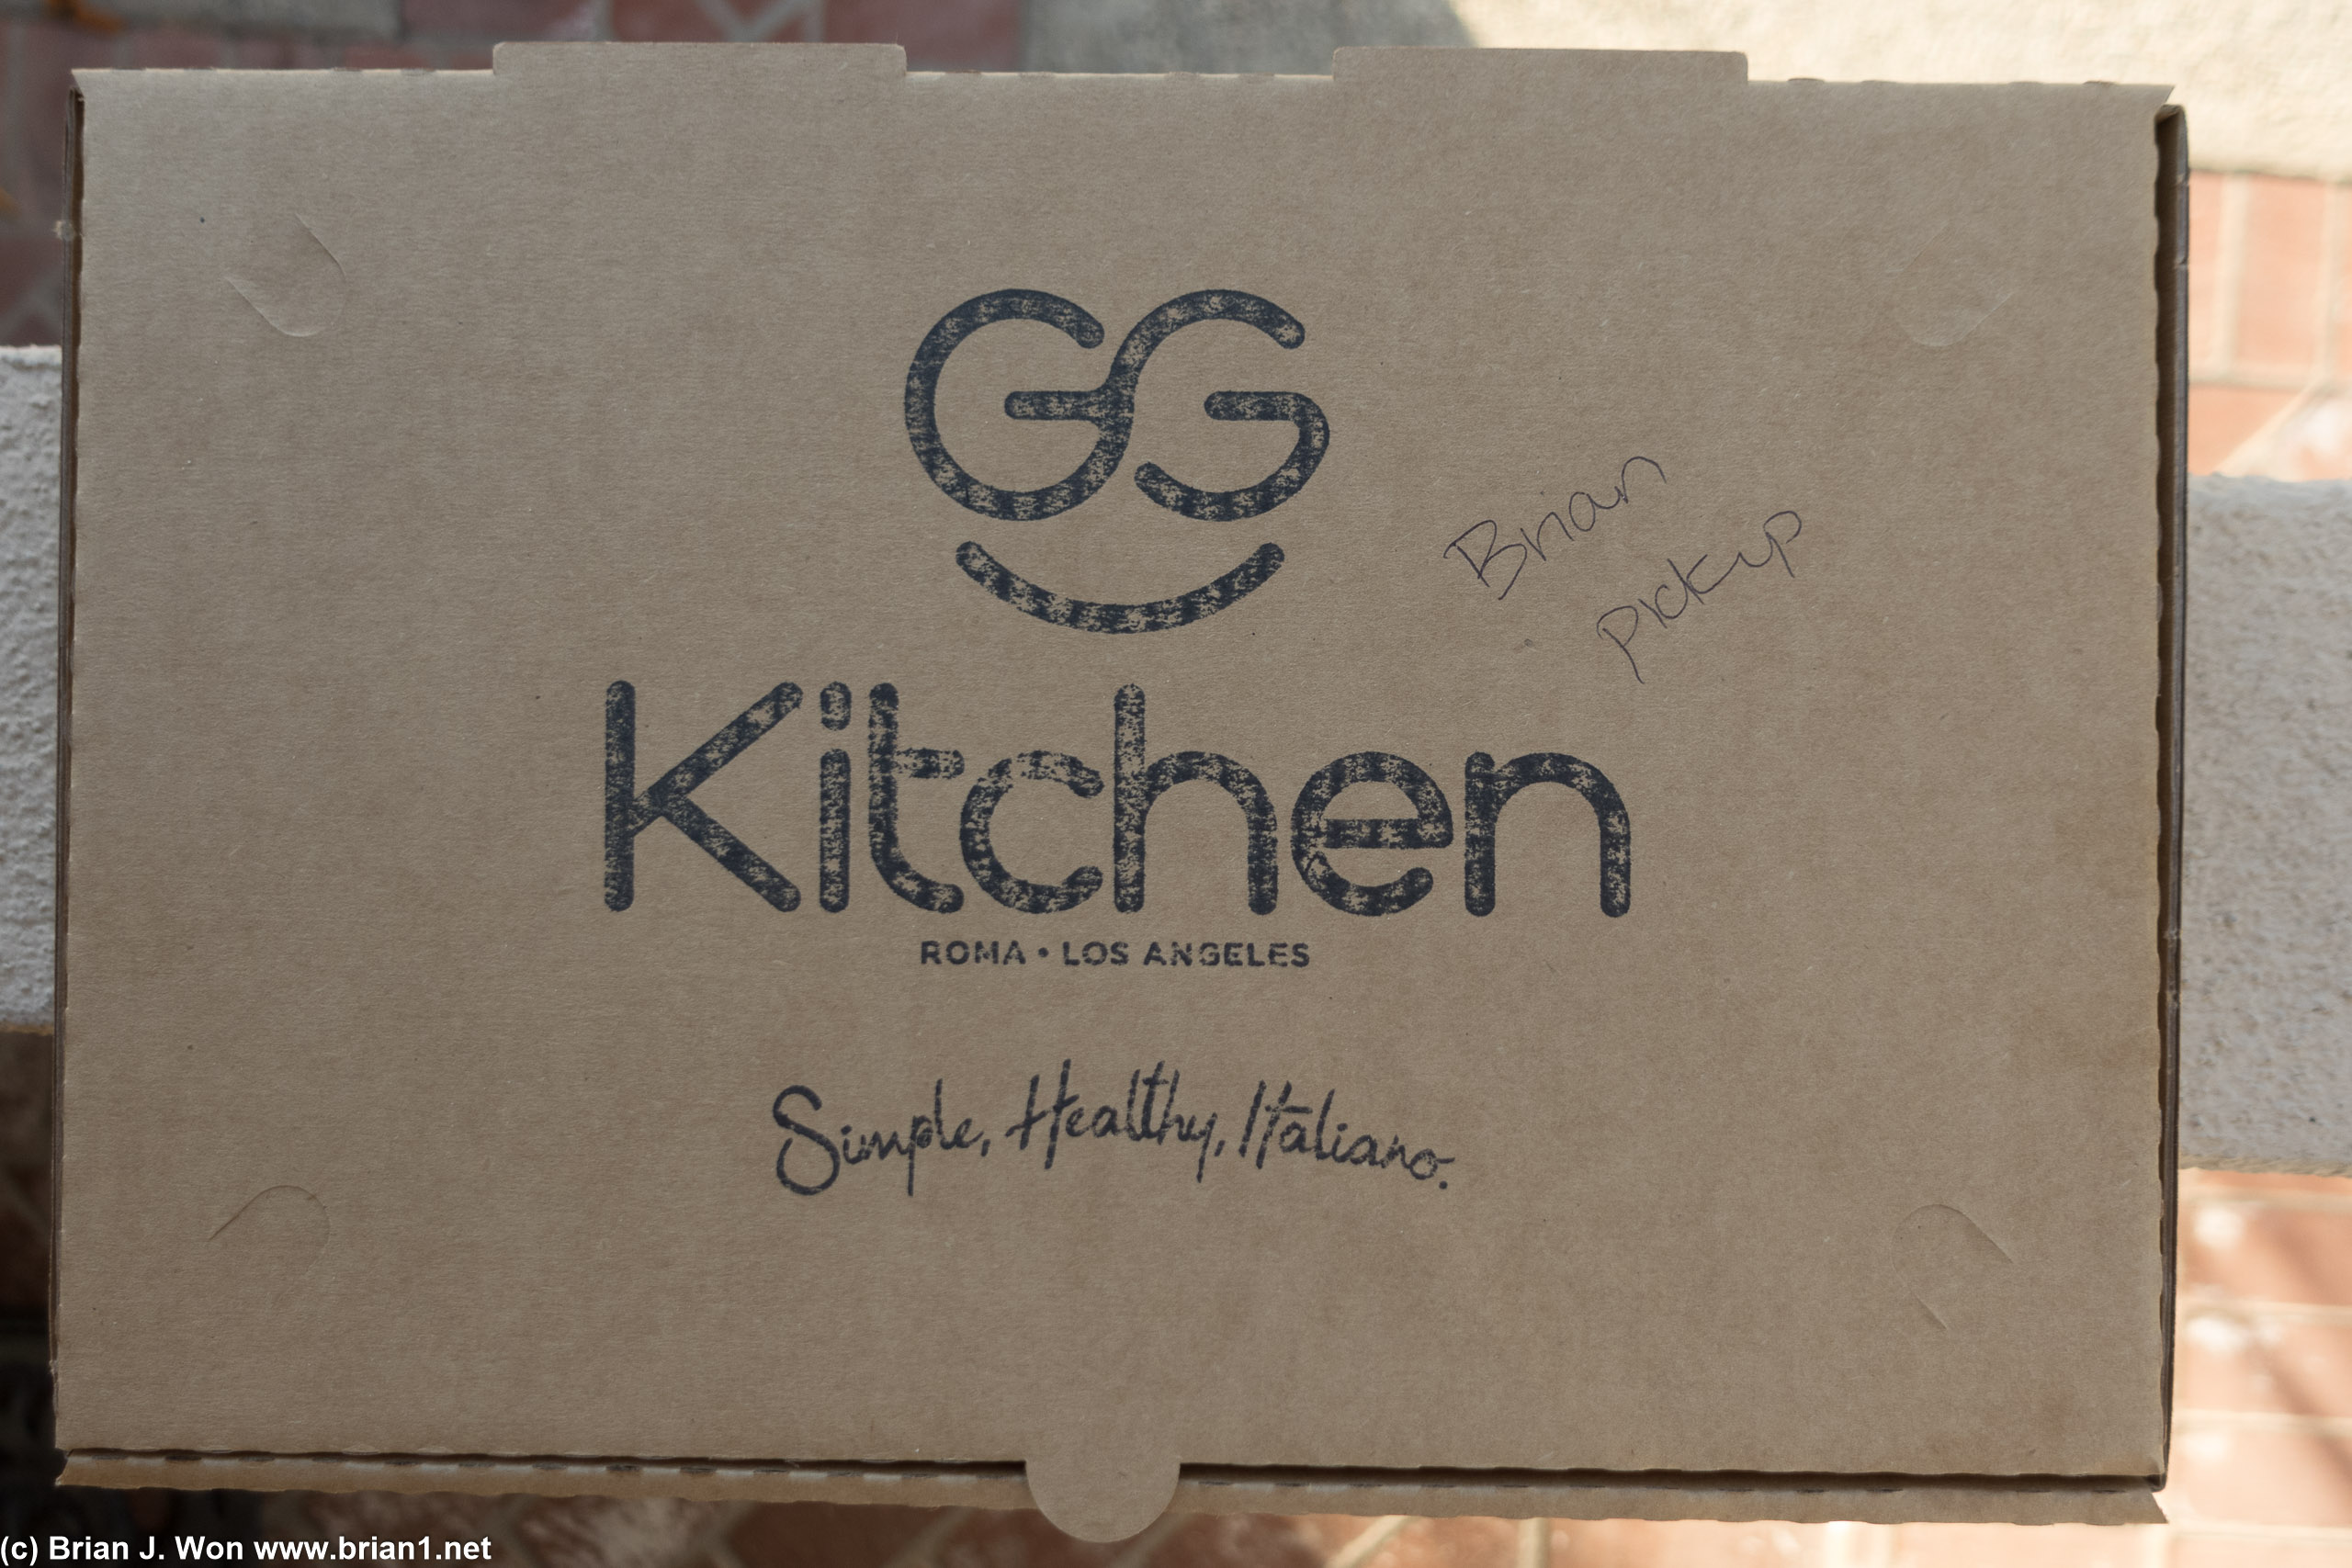 Does GG mean the fake Italian brothers story on the website or does it mean Goop Gourmet Kitchen? Or both?